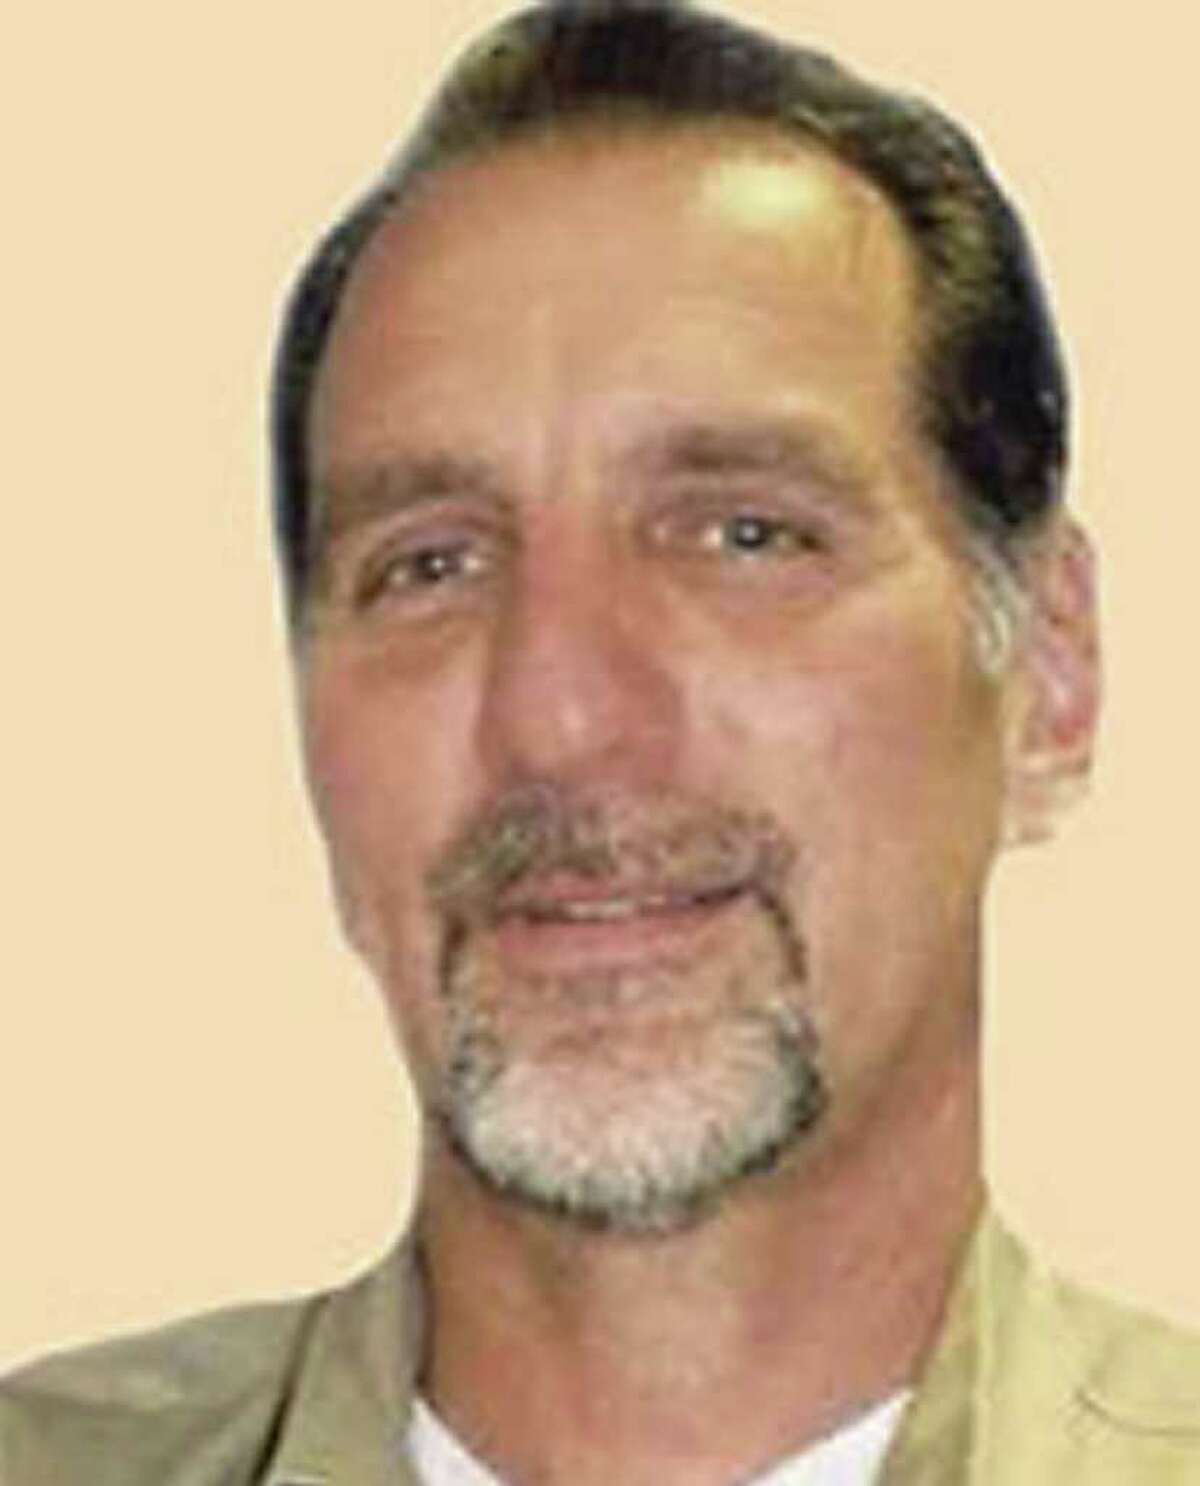 (FILES) 2007 picture released by Cuban newspaper Juventud Rebelde of Cuban citizen Rene Gonzalez Sechweret, member of the Cuban Five group. The first of five Cuban agents jailed since 1998 in the United States on spy charges was freed from a Florida prison ON oCTOBER 7, 2011 in a case that has dogged ties between Washington and Havana for more than 10 years. Rene Gonzalez "was released earlier today" from the Marianna federal prison, his attorney Philip Horowitz told AFP. AFP PHOTO/HO-Juventud Rebelde (Photo credit should read HO/AFP/Getty Images)